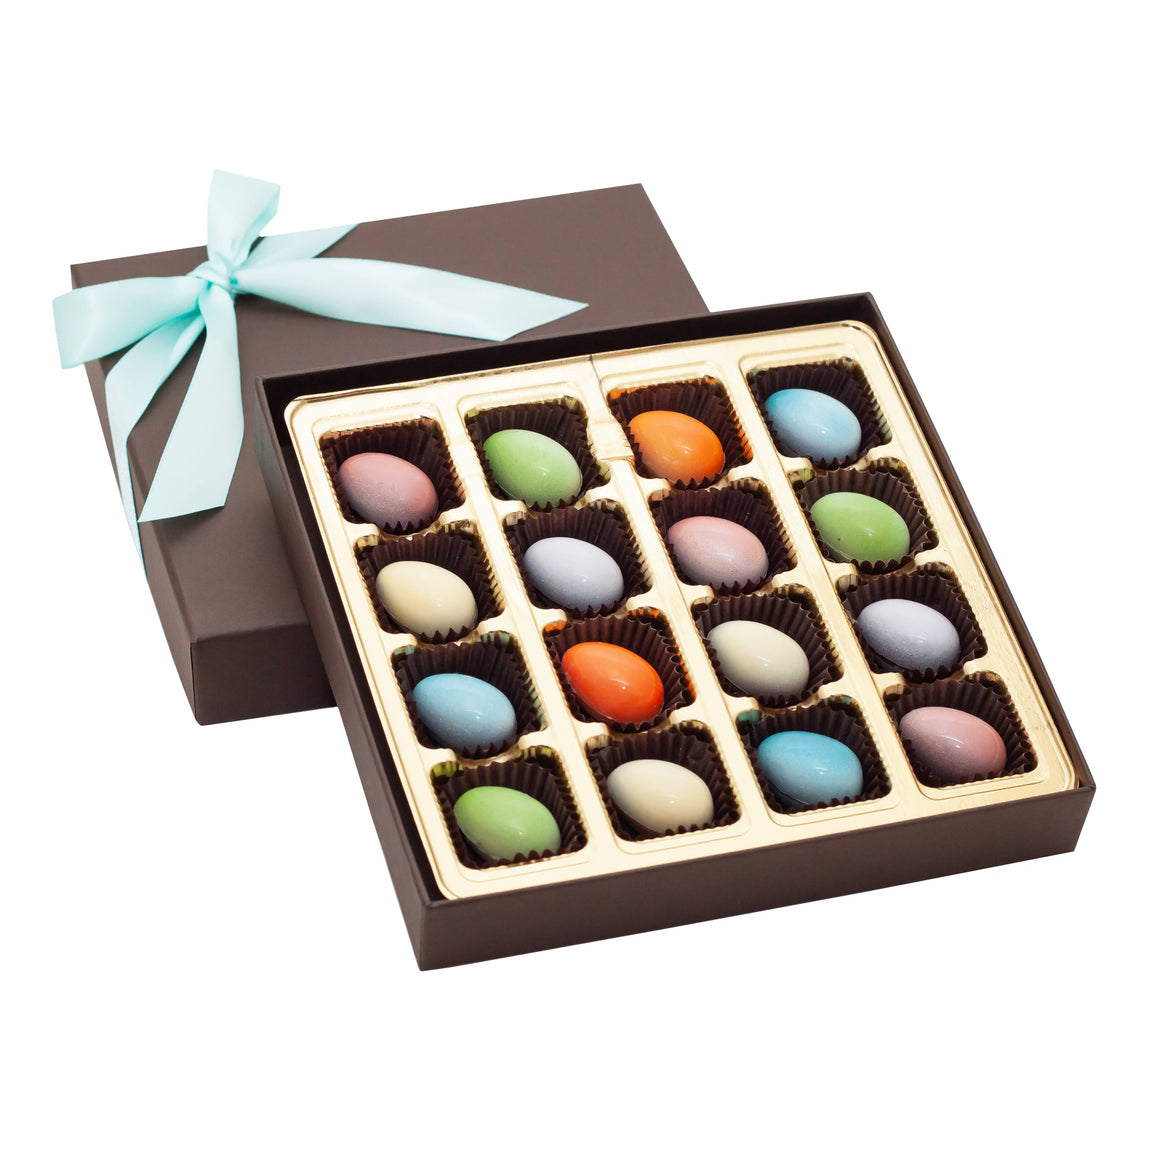 16 piece gift box with chocolate eggs